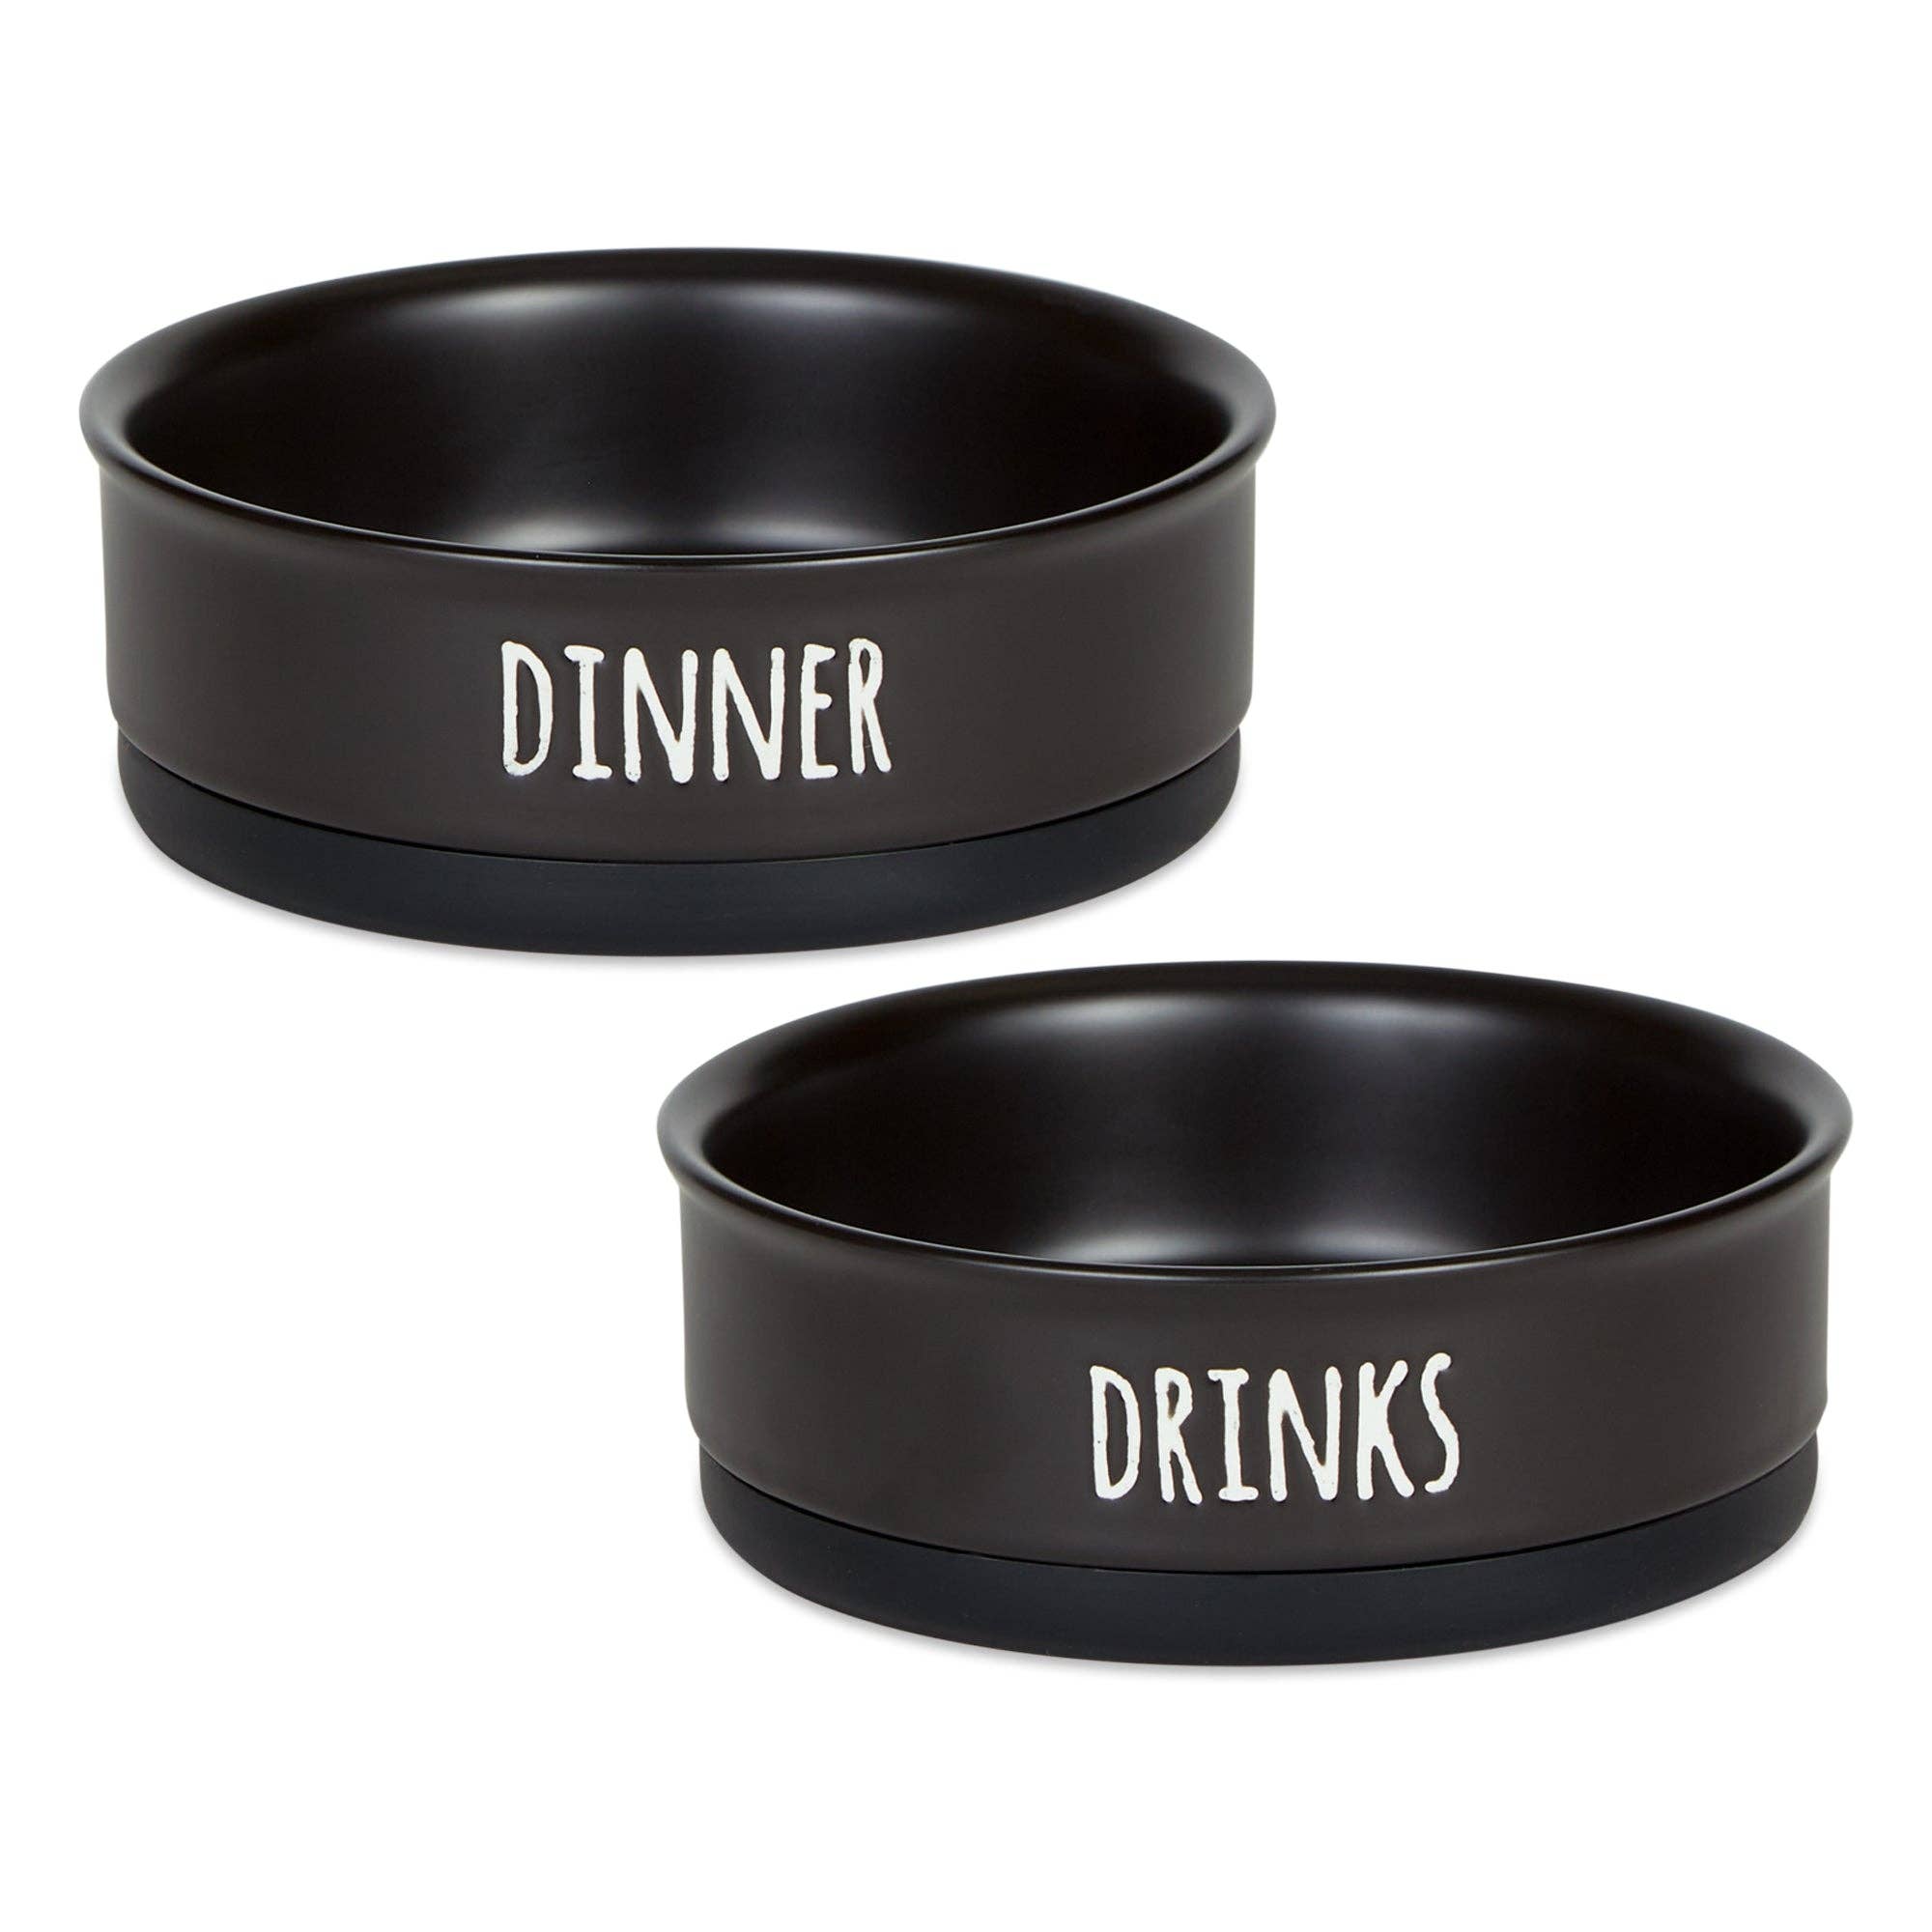 Bone Dry Farmhouse Style Pet Bowl Dinner And Drinks in Black (Set of 2)